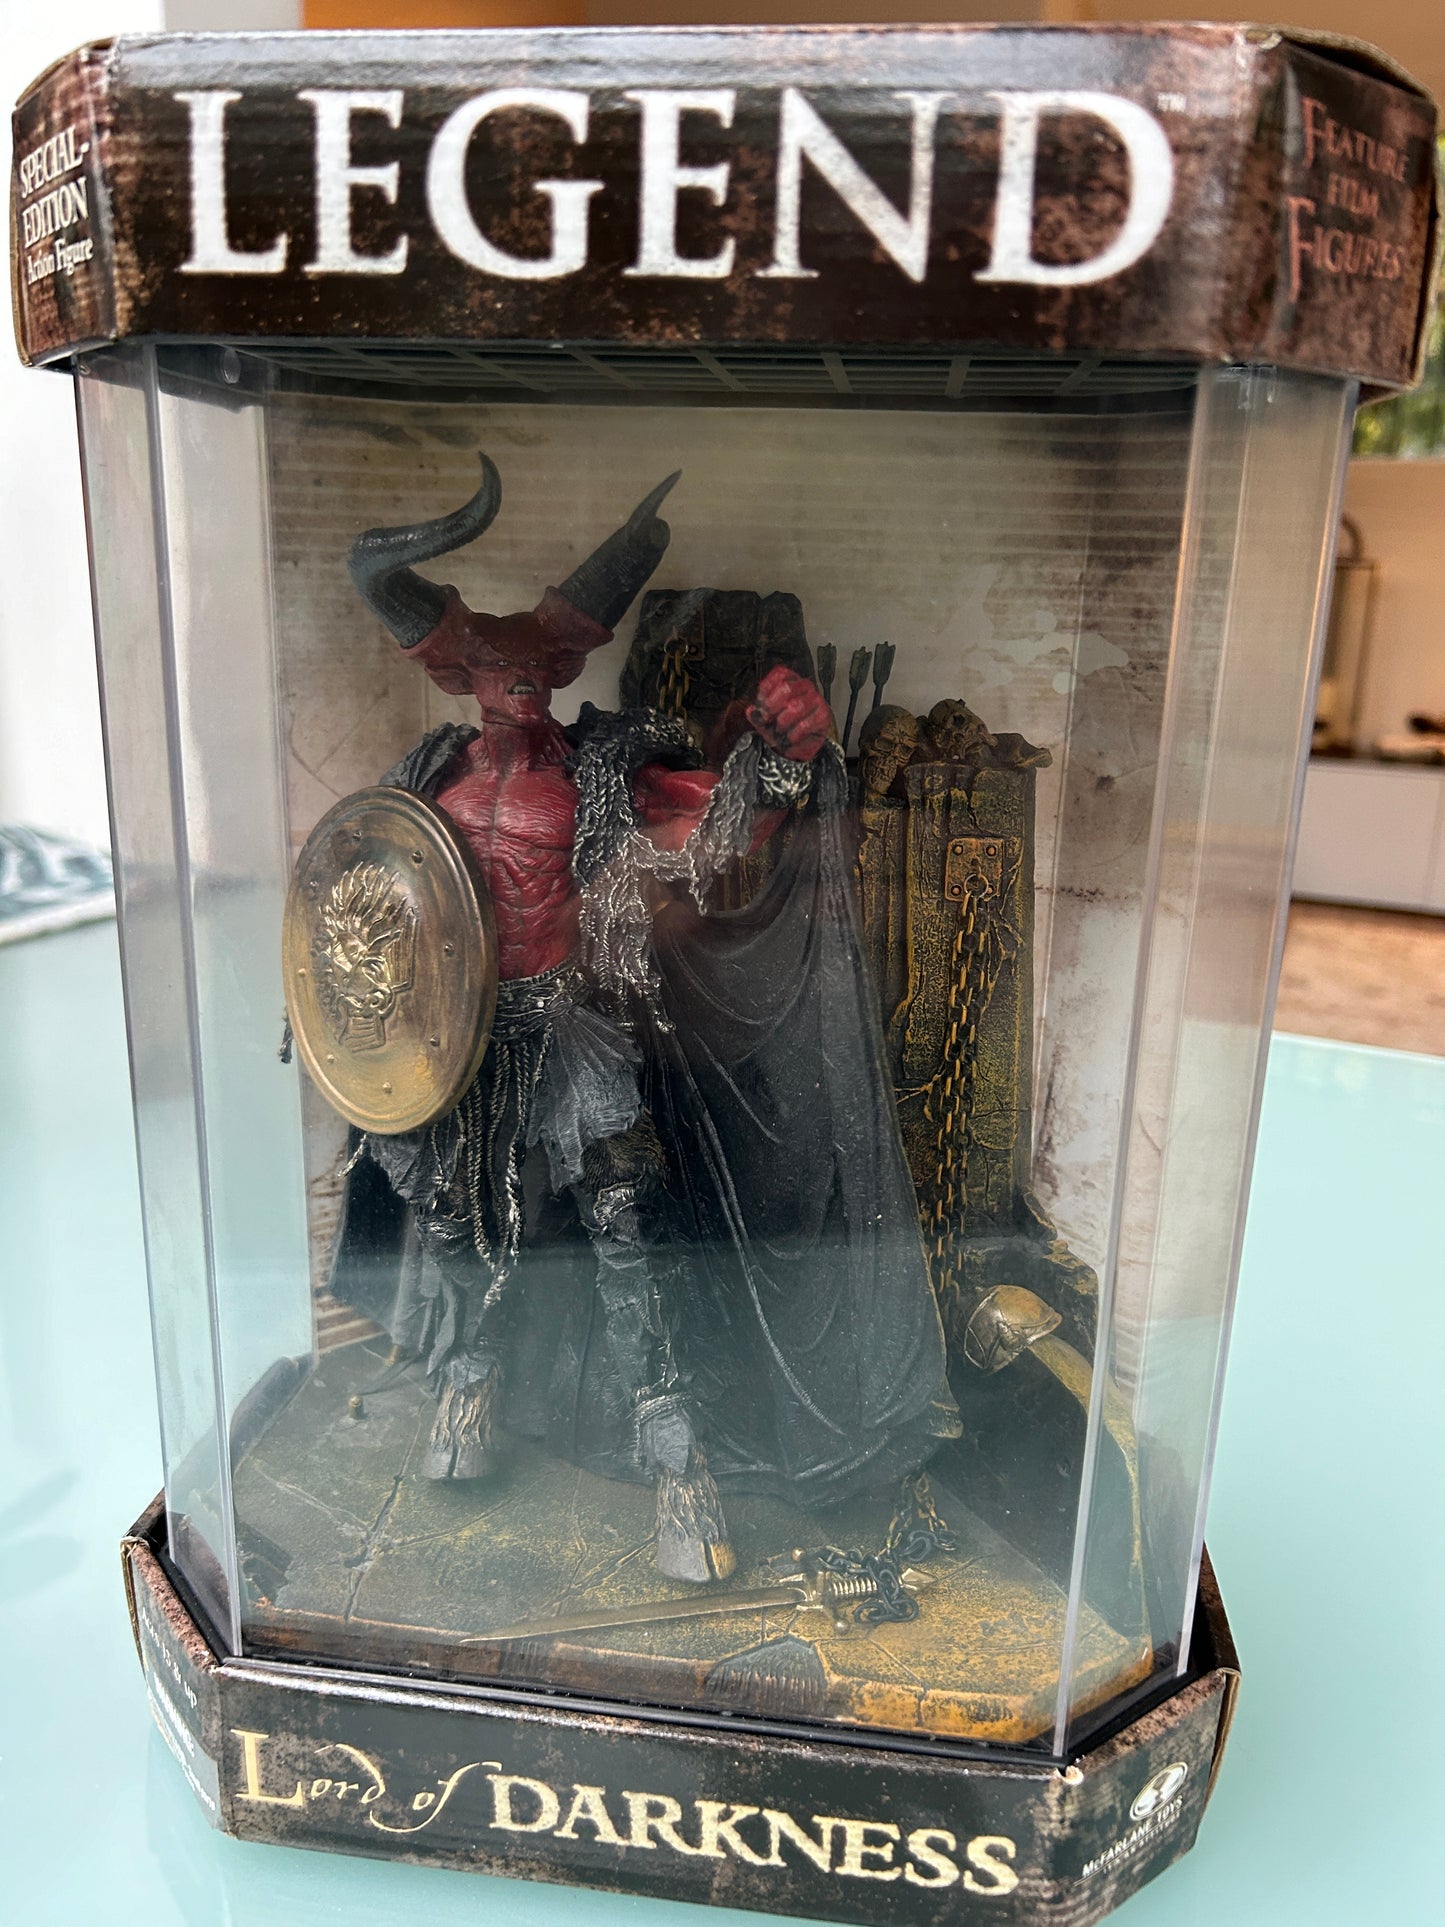 LEGEND - Série MOVIE MANIACS Special Edition - Figurine de Lord of Darkness - 2003 ***Occasion***